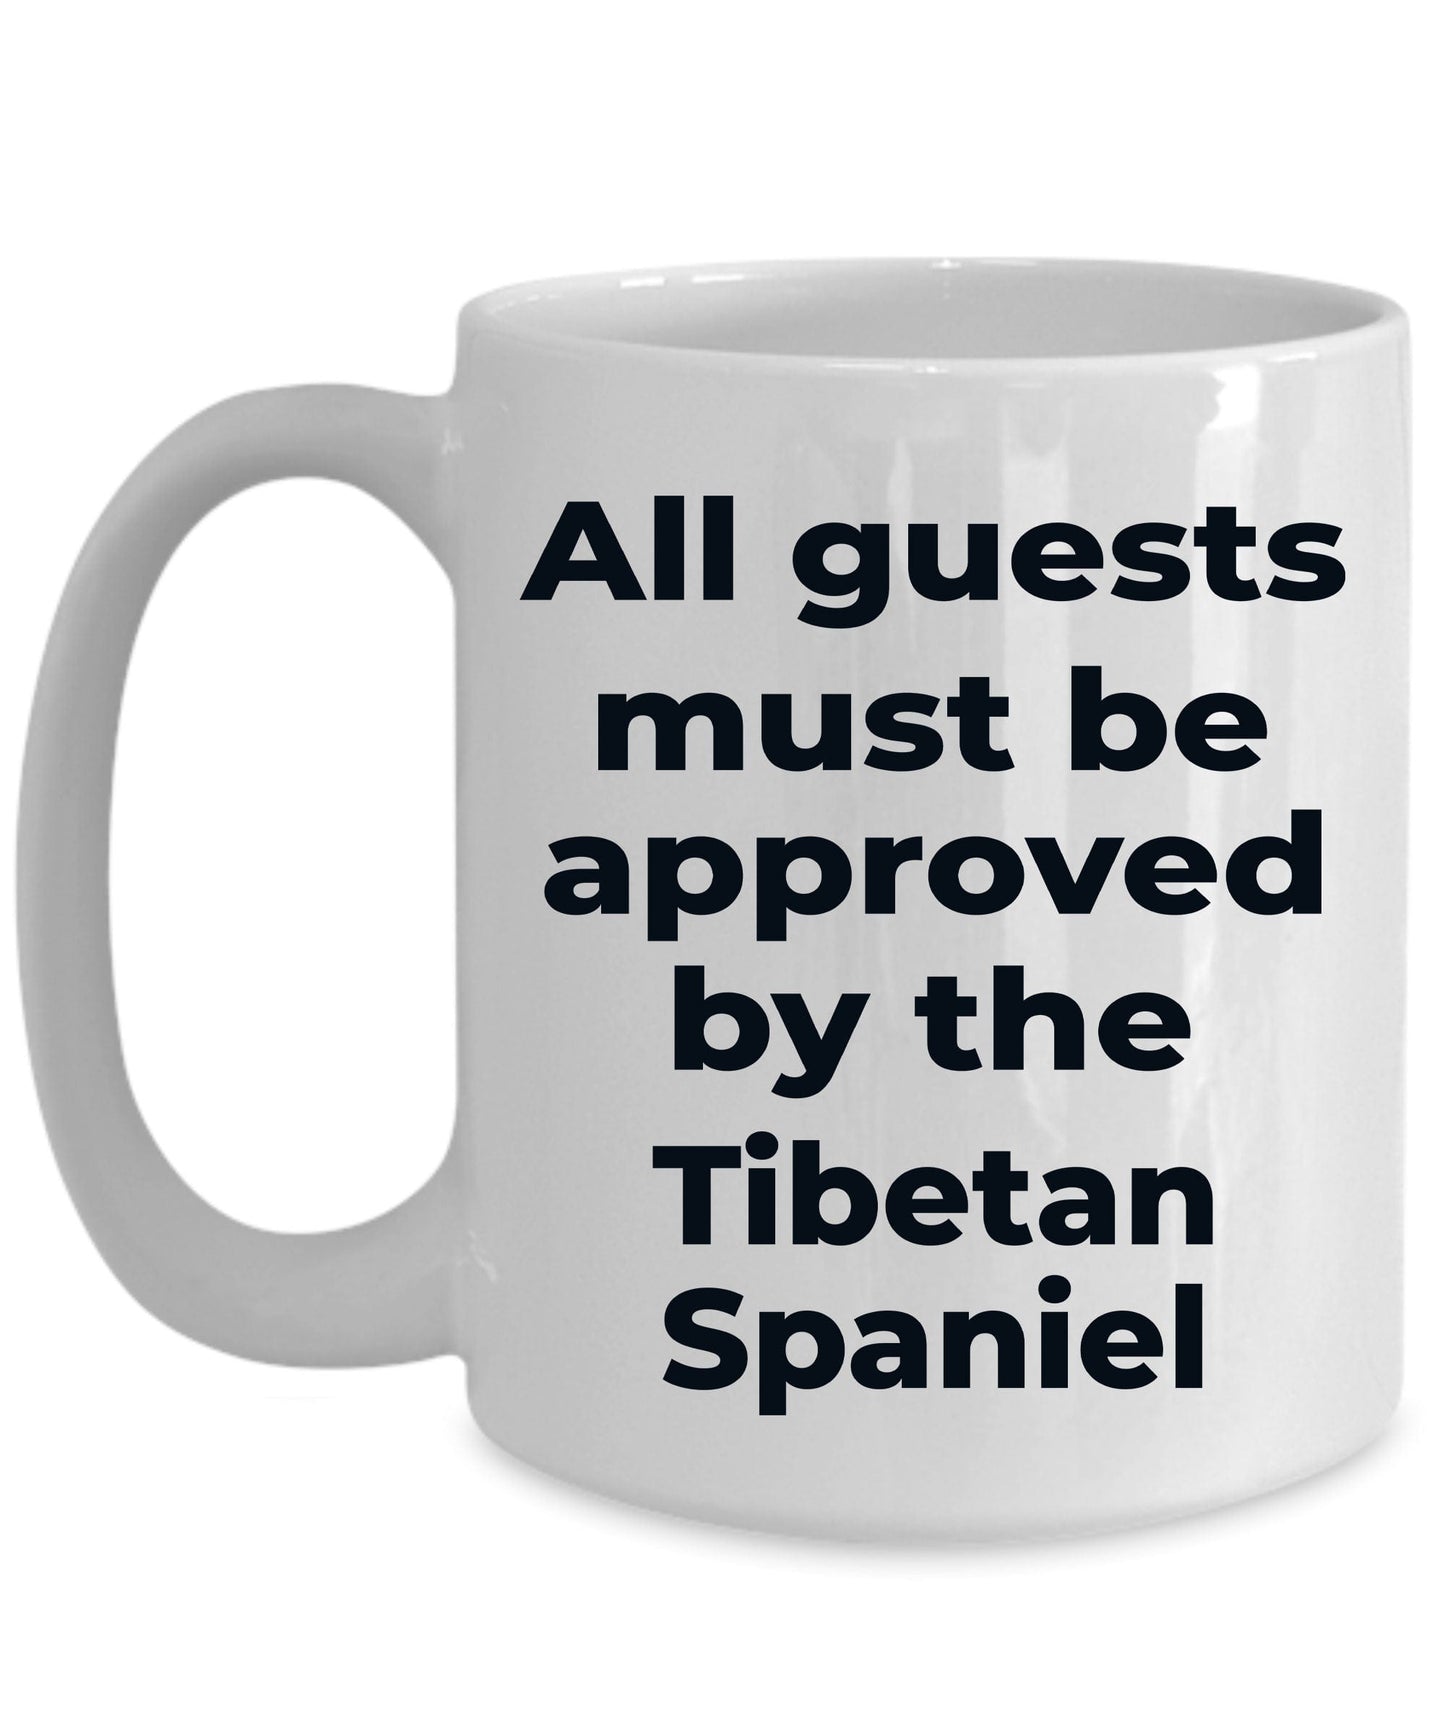 Tibetan Spaniel Funny Dog Coffee Mug - All guests must be appoved by the Tibetan Spaniel